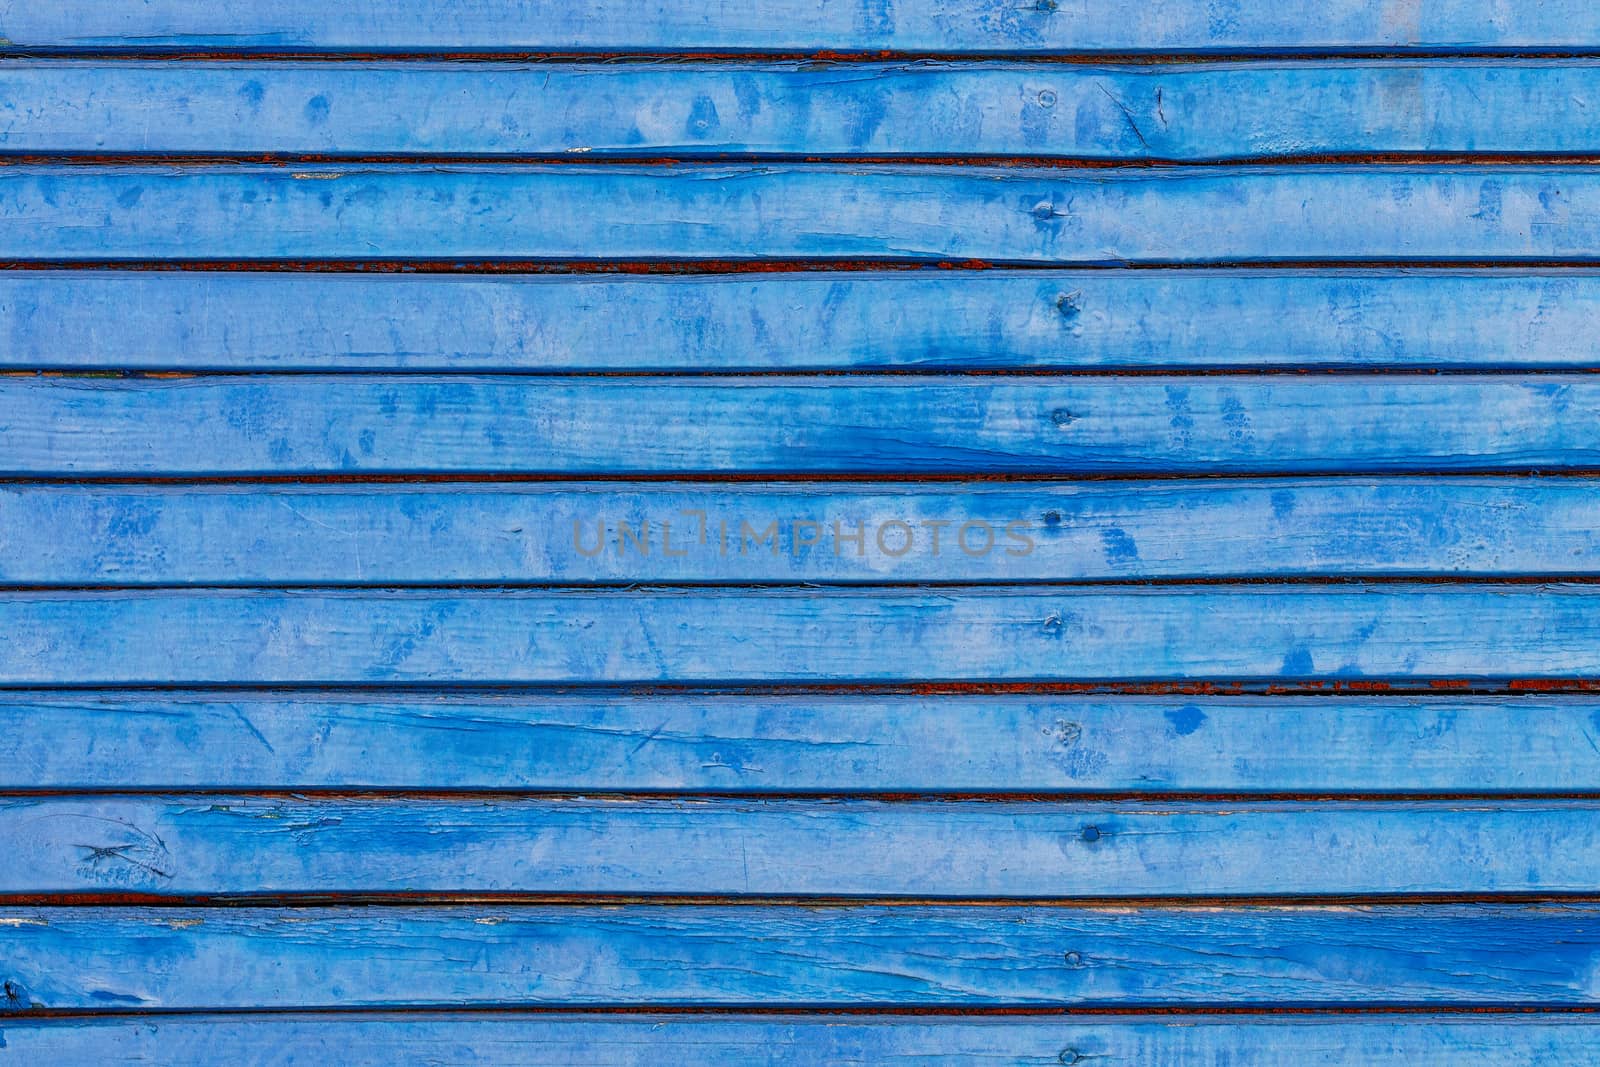 Fence from an old lining board clapboard covered with blue paint with a weathered cracked surface.